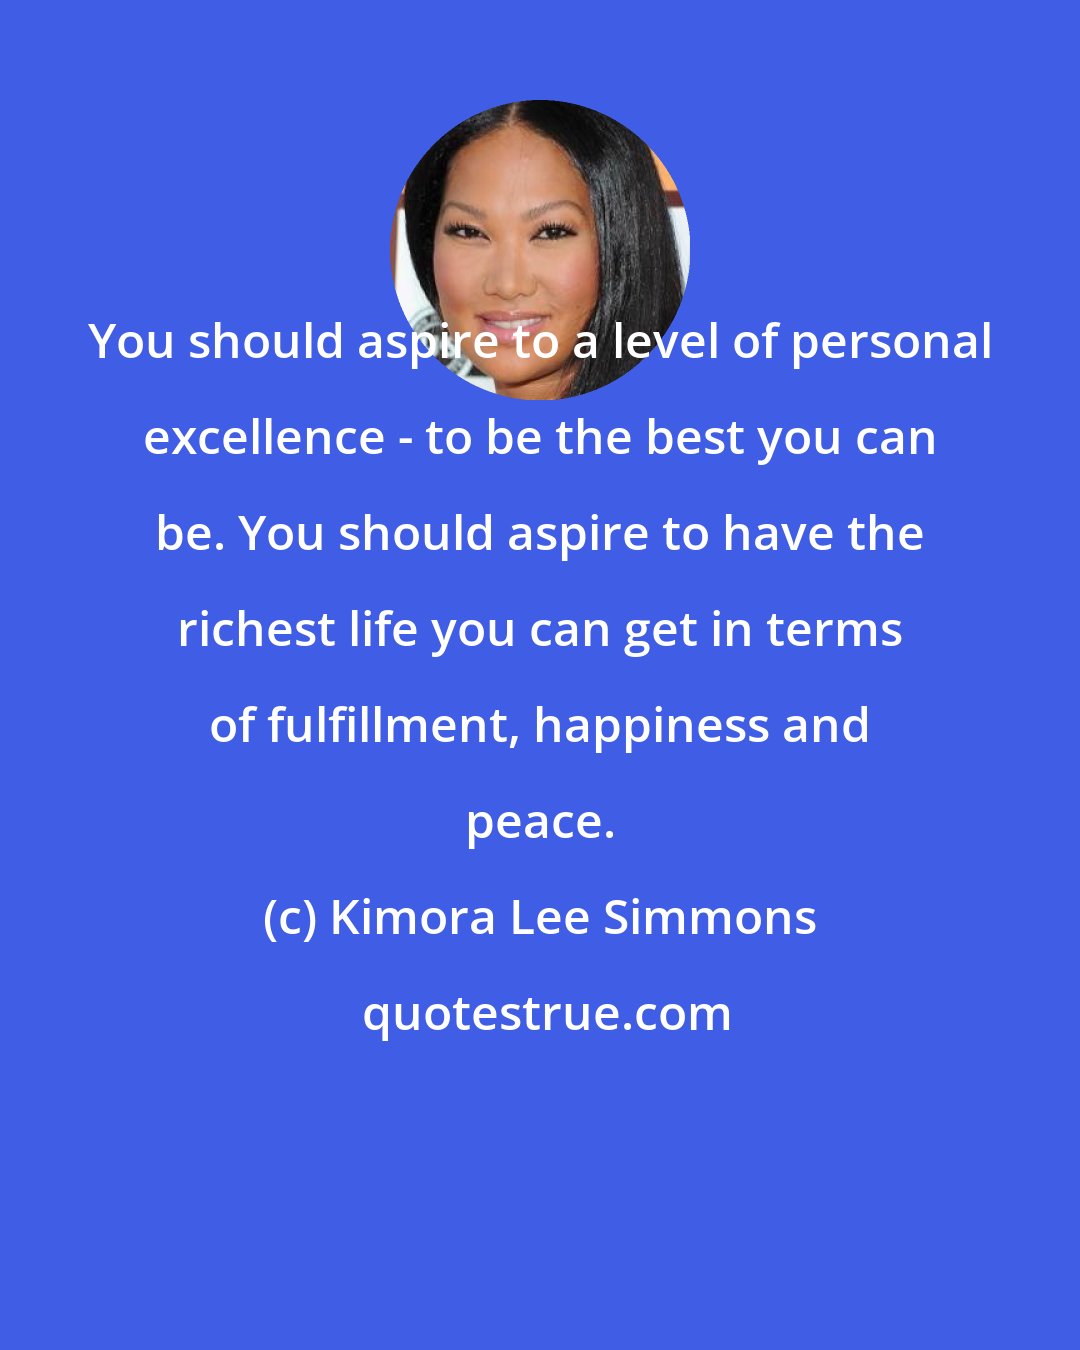 Kimora Lee Simmons: You should aspire to a level of personal excellence - to be the best you can be. You should aspire to have the richest life you can get in terms of fulfillment, happiness and peace.